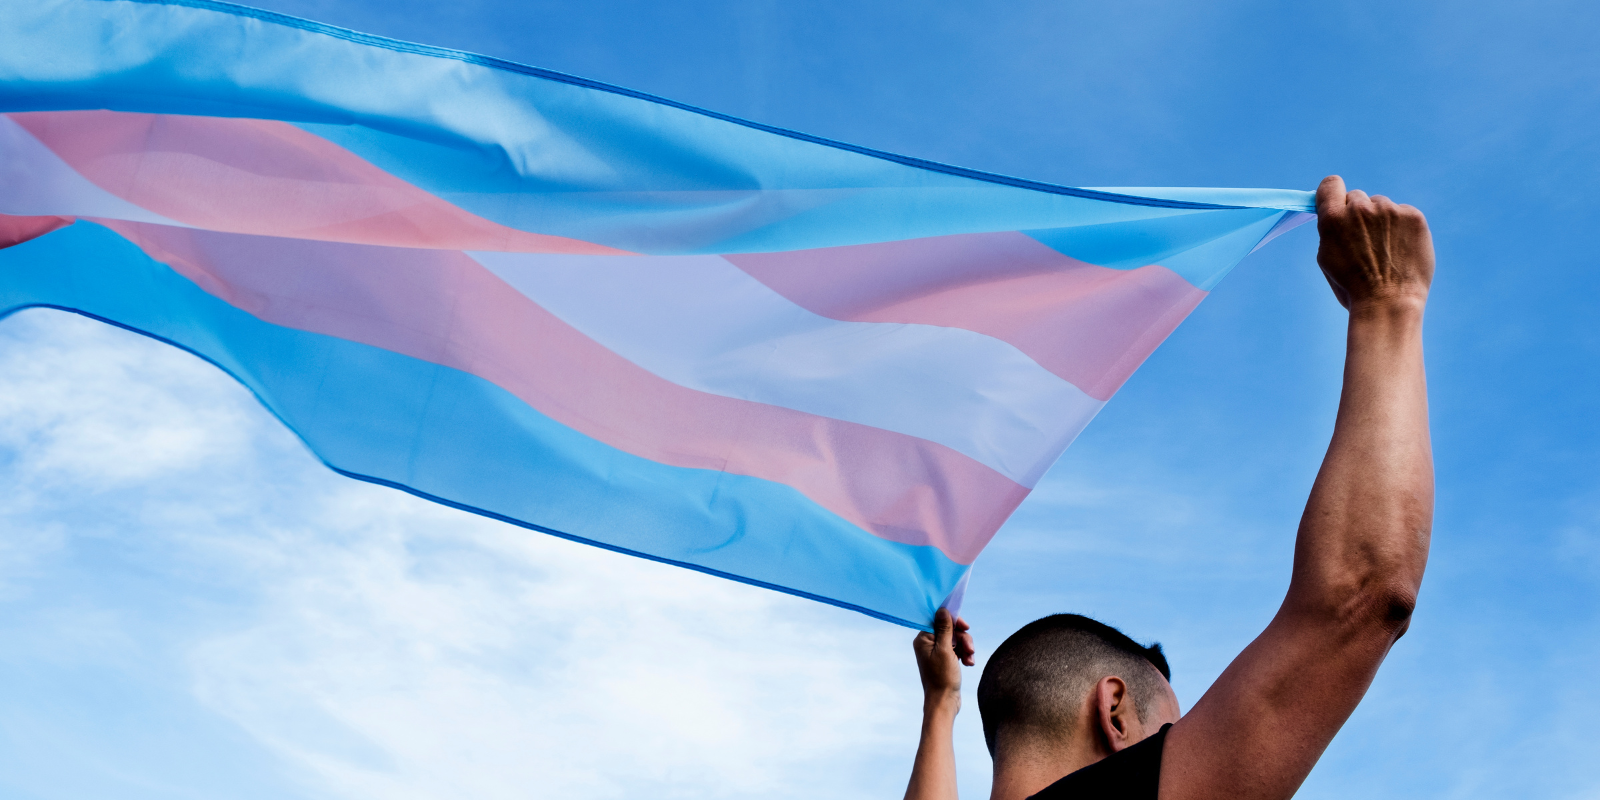 Photo of the transgender pride flag being held by a person.